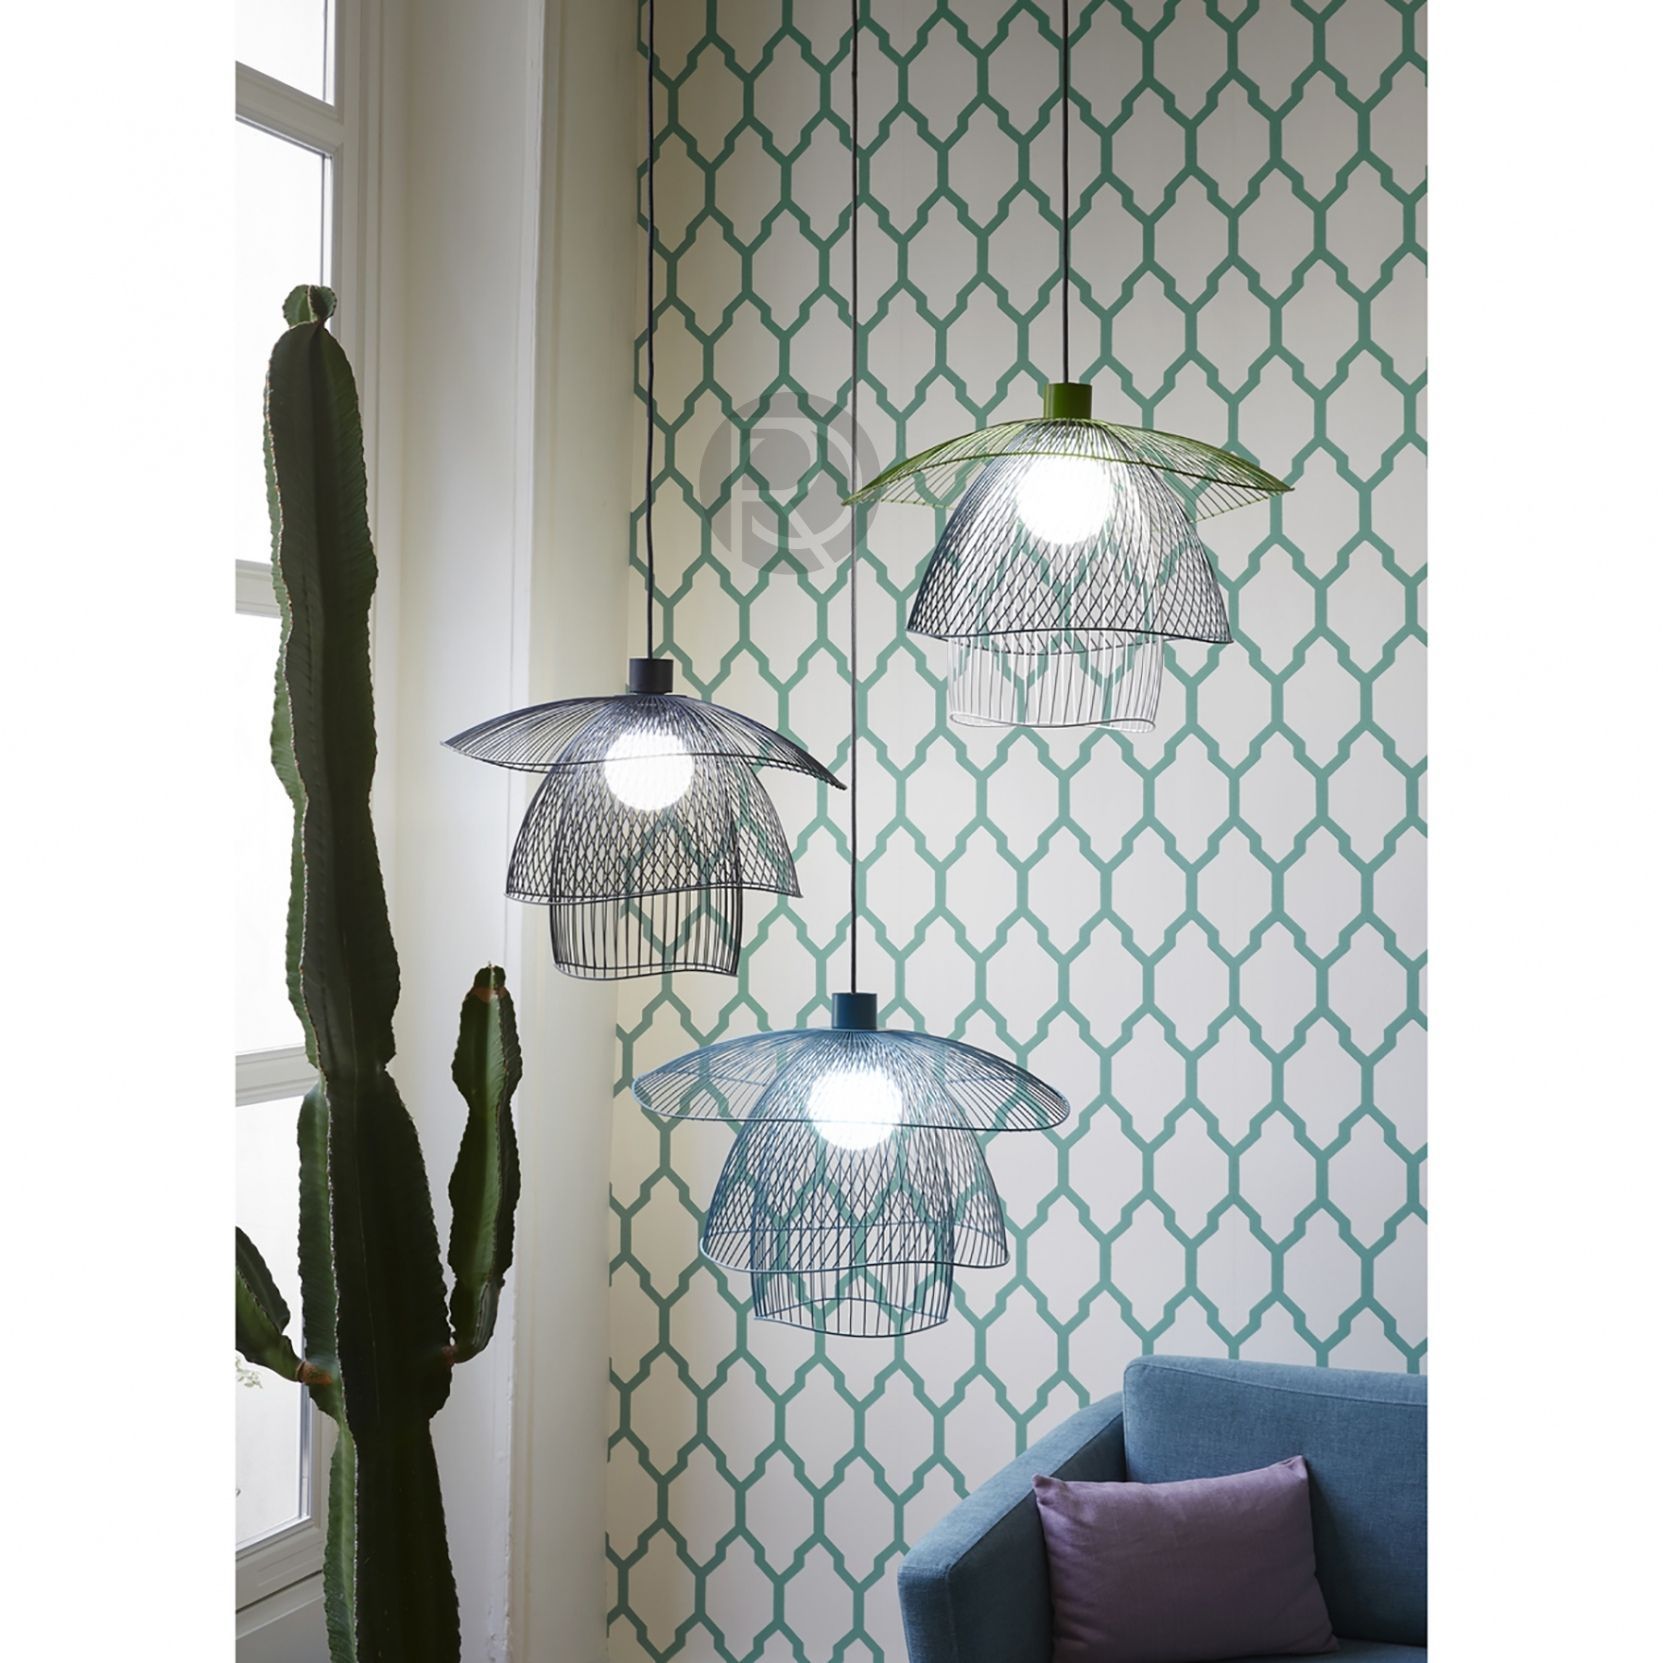 Hanging lamp PAPILLON'S by Forestier